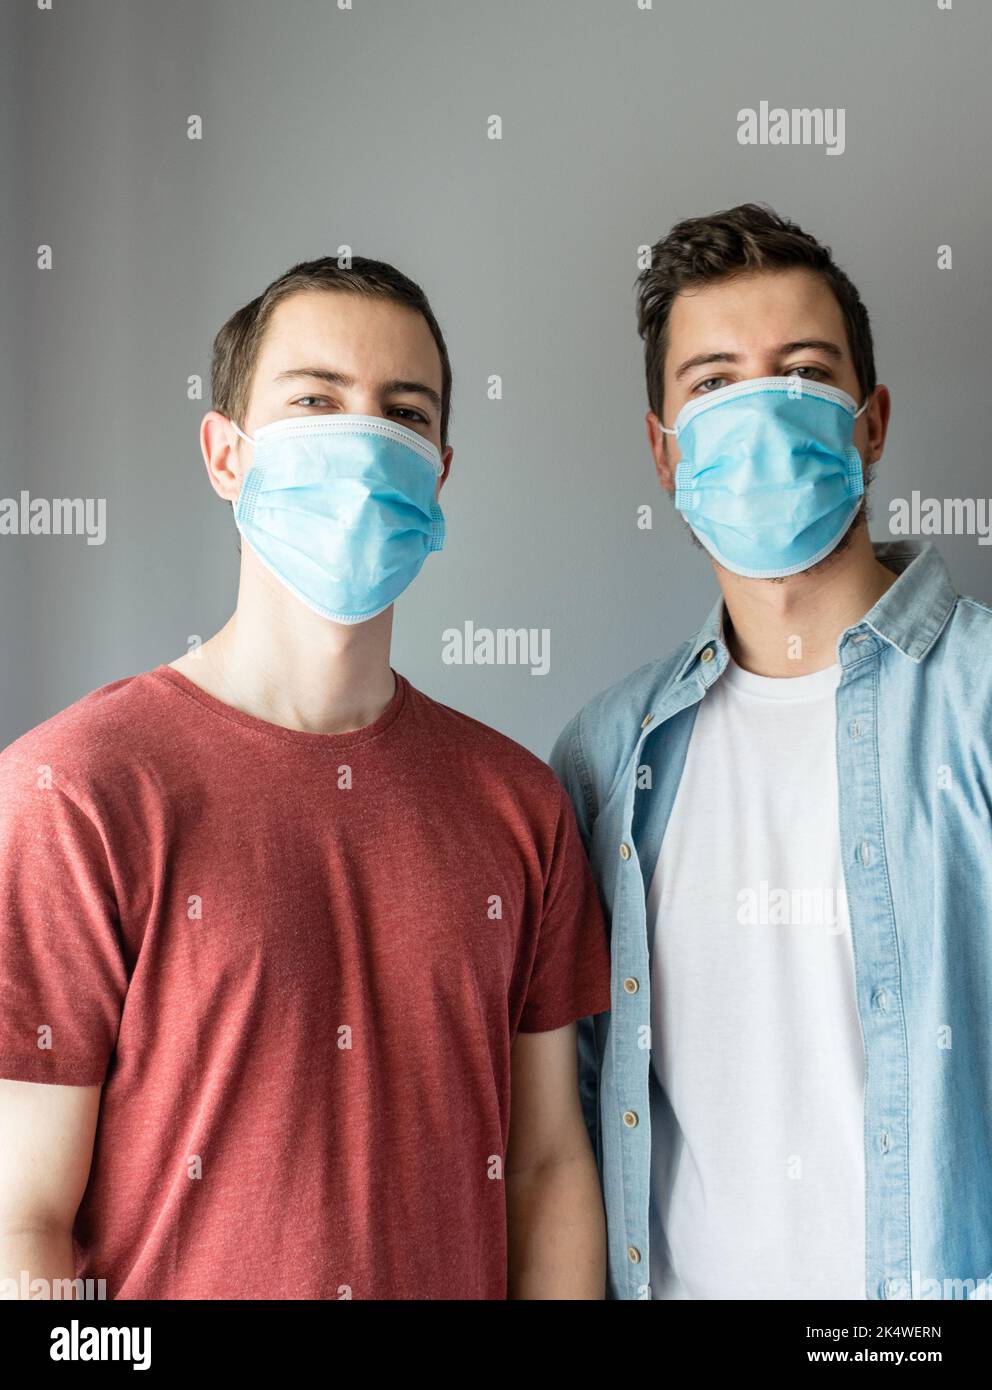 Close-up portrait of two men standing side by side wearing disposable protective face mask Stock Photo